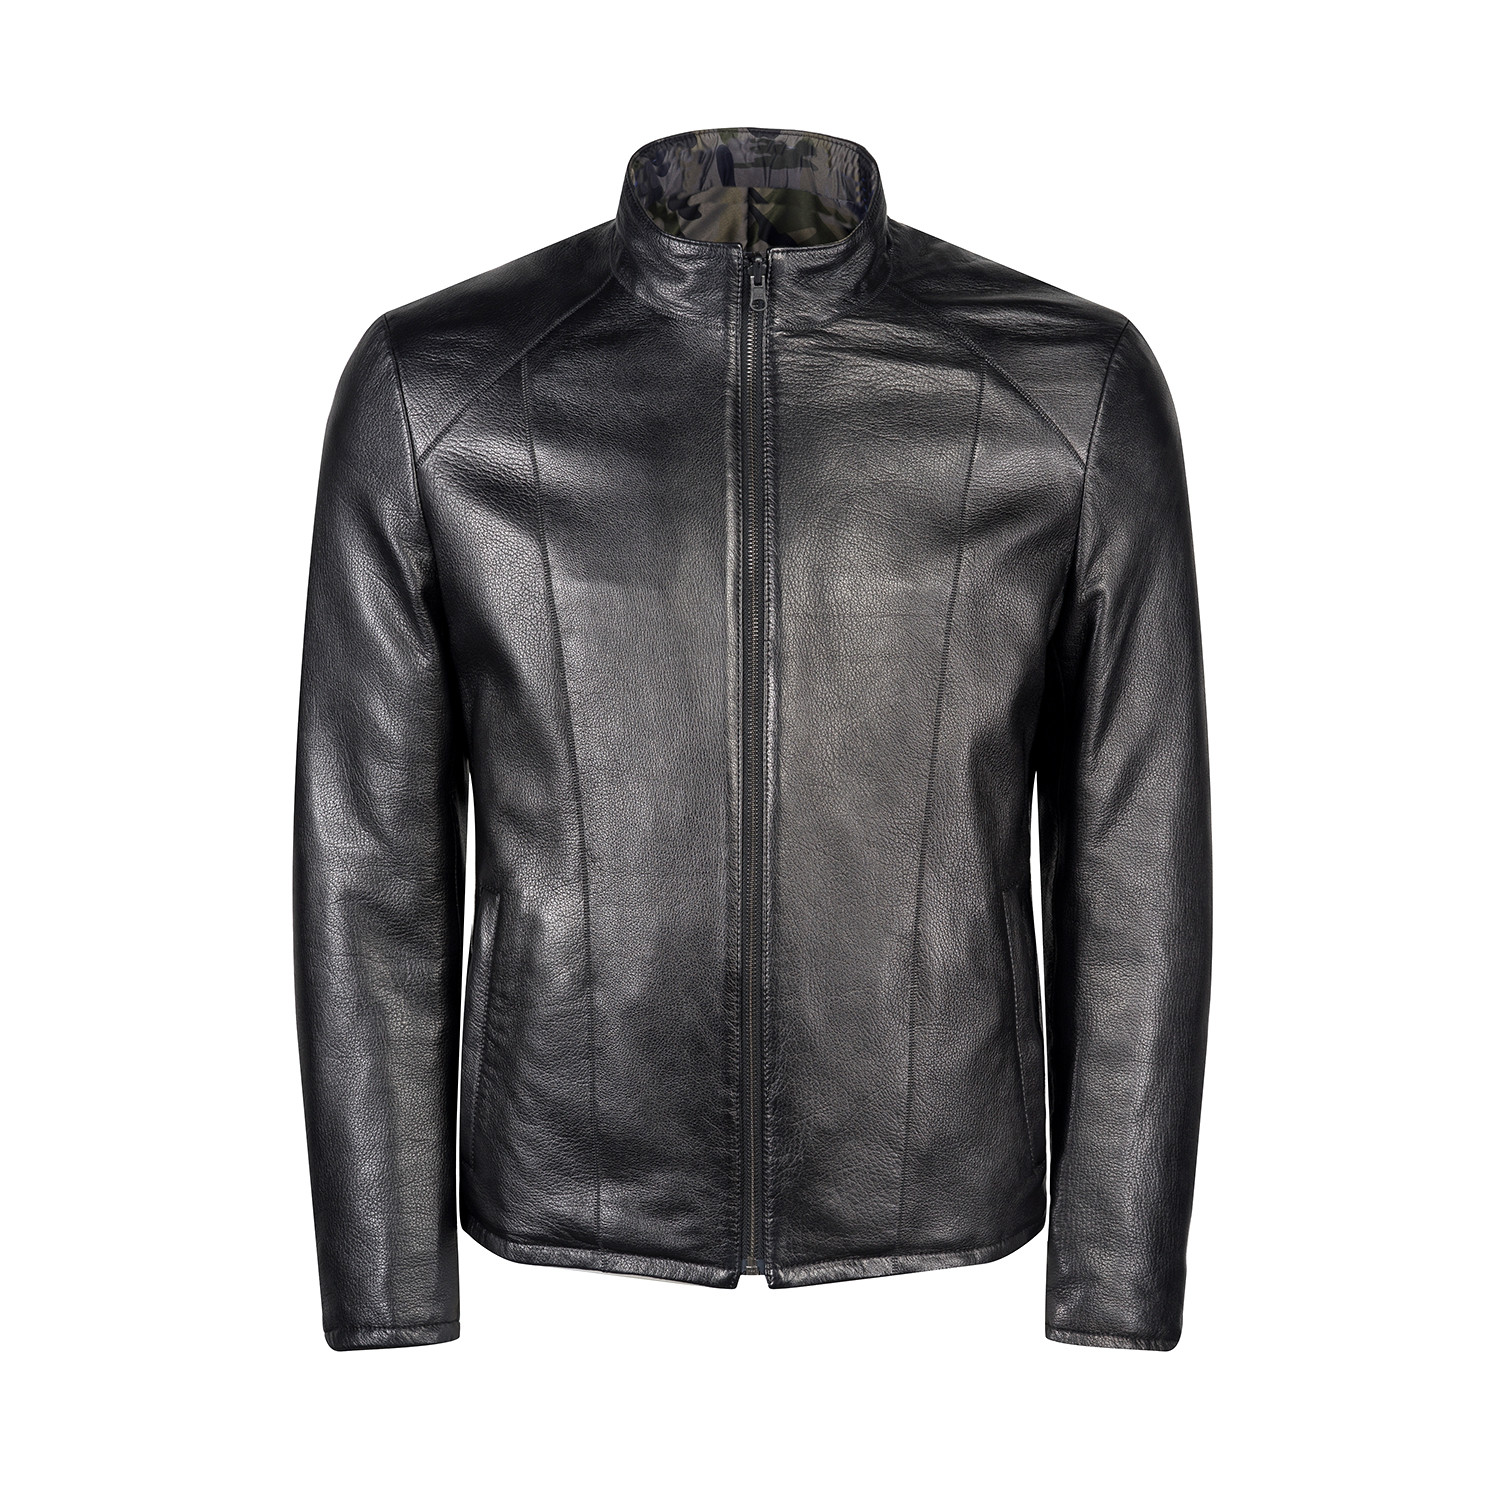 Ray Leather Jacket Slim Fit // Black (S) - Ruck & Maul // Markawell ...